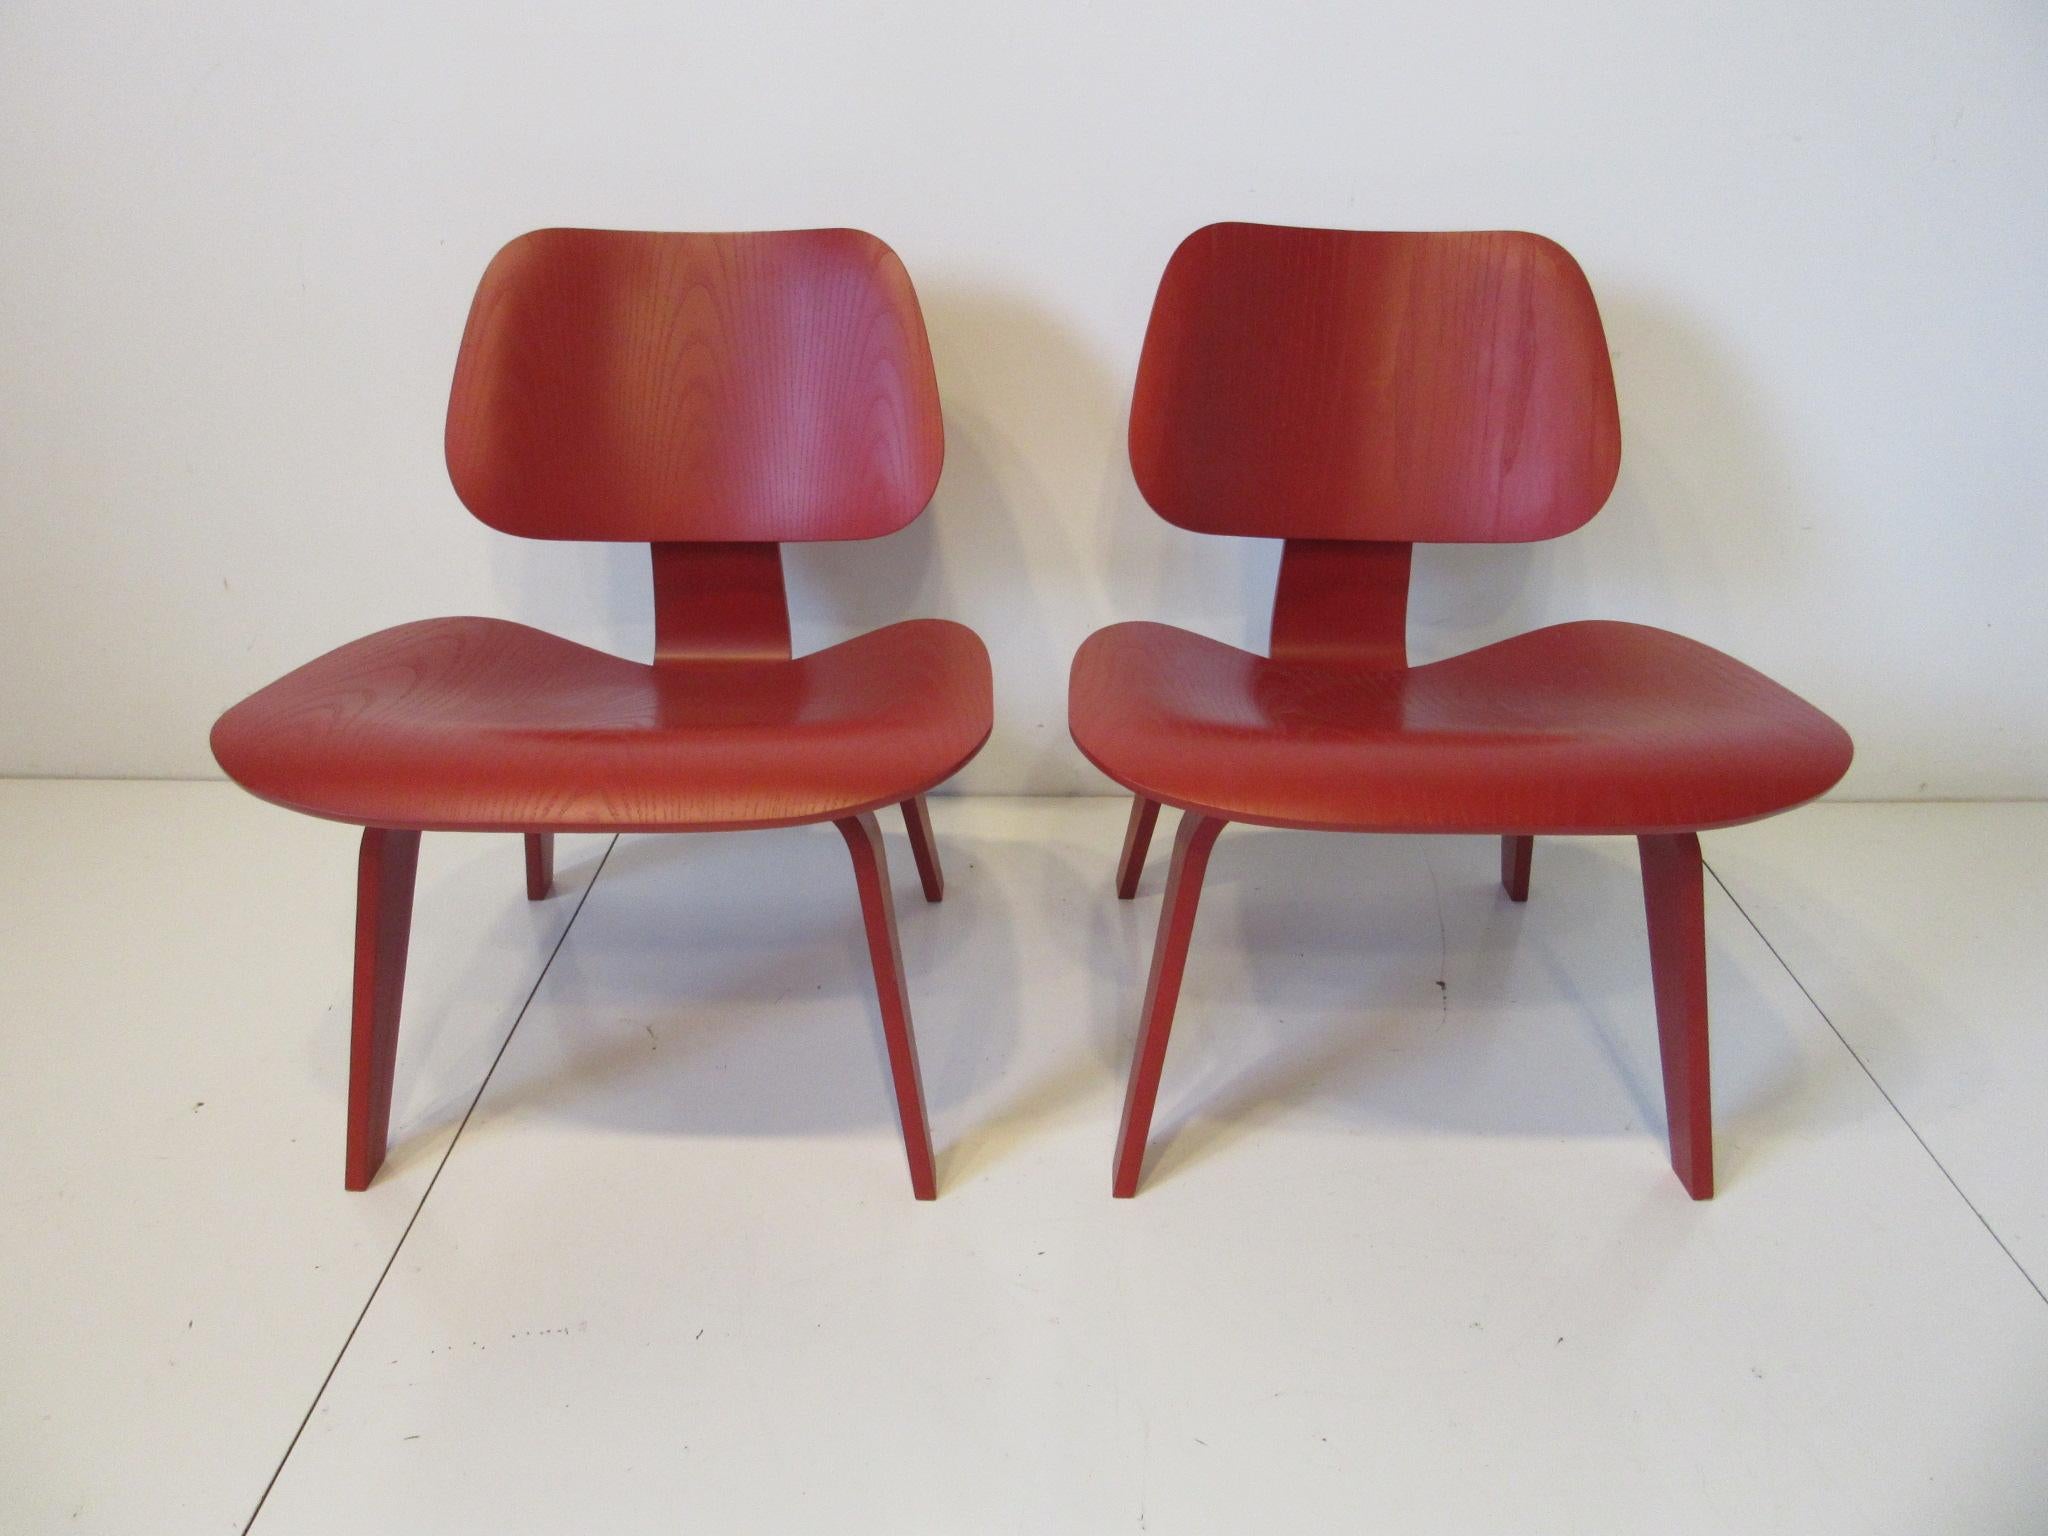 A matching pair of red dyed LCW lounge chairs in wood having the lower lounge height for comfort, continued production since the 1950's these iconic chairs are still as fresh as the first days of their introduction. Retaining the manufactures labels